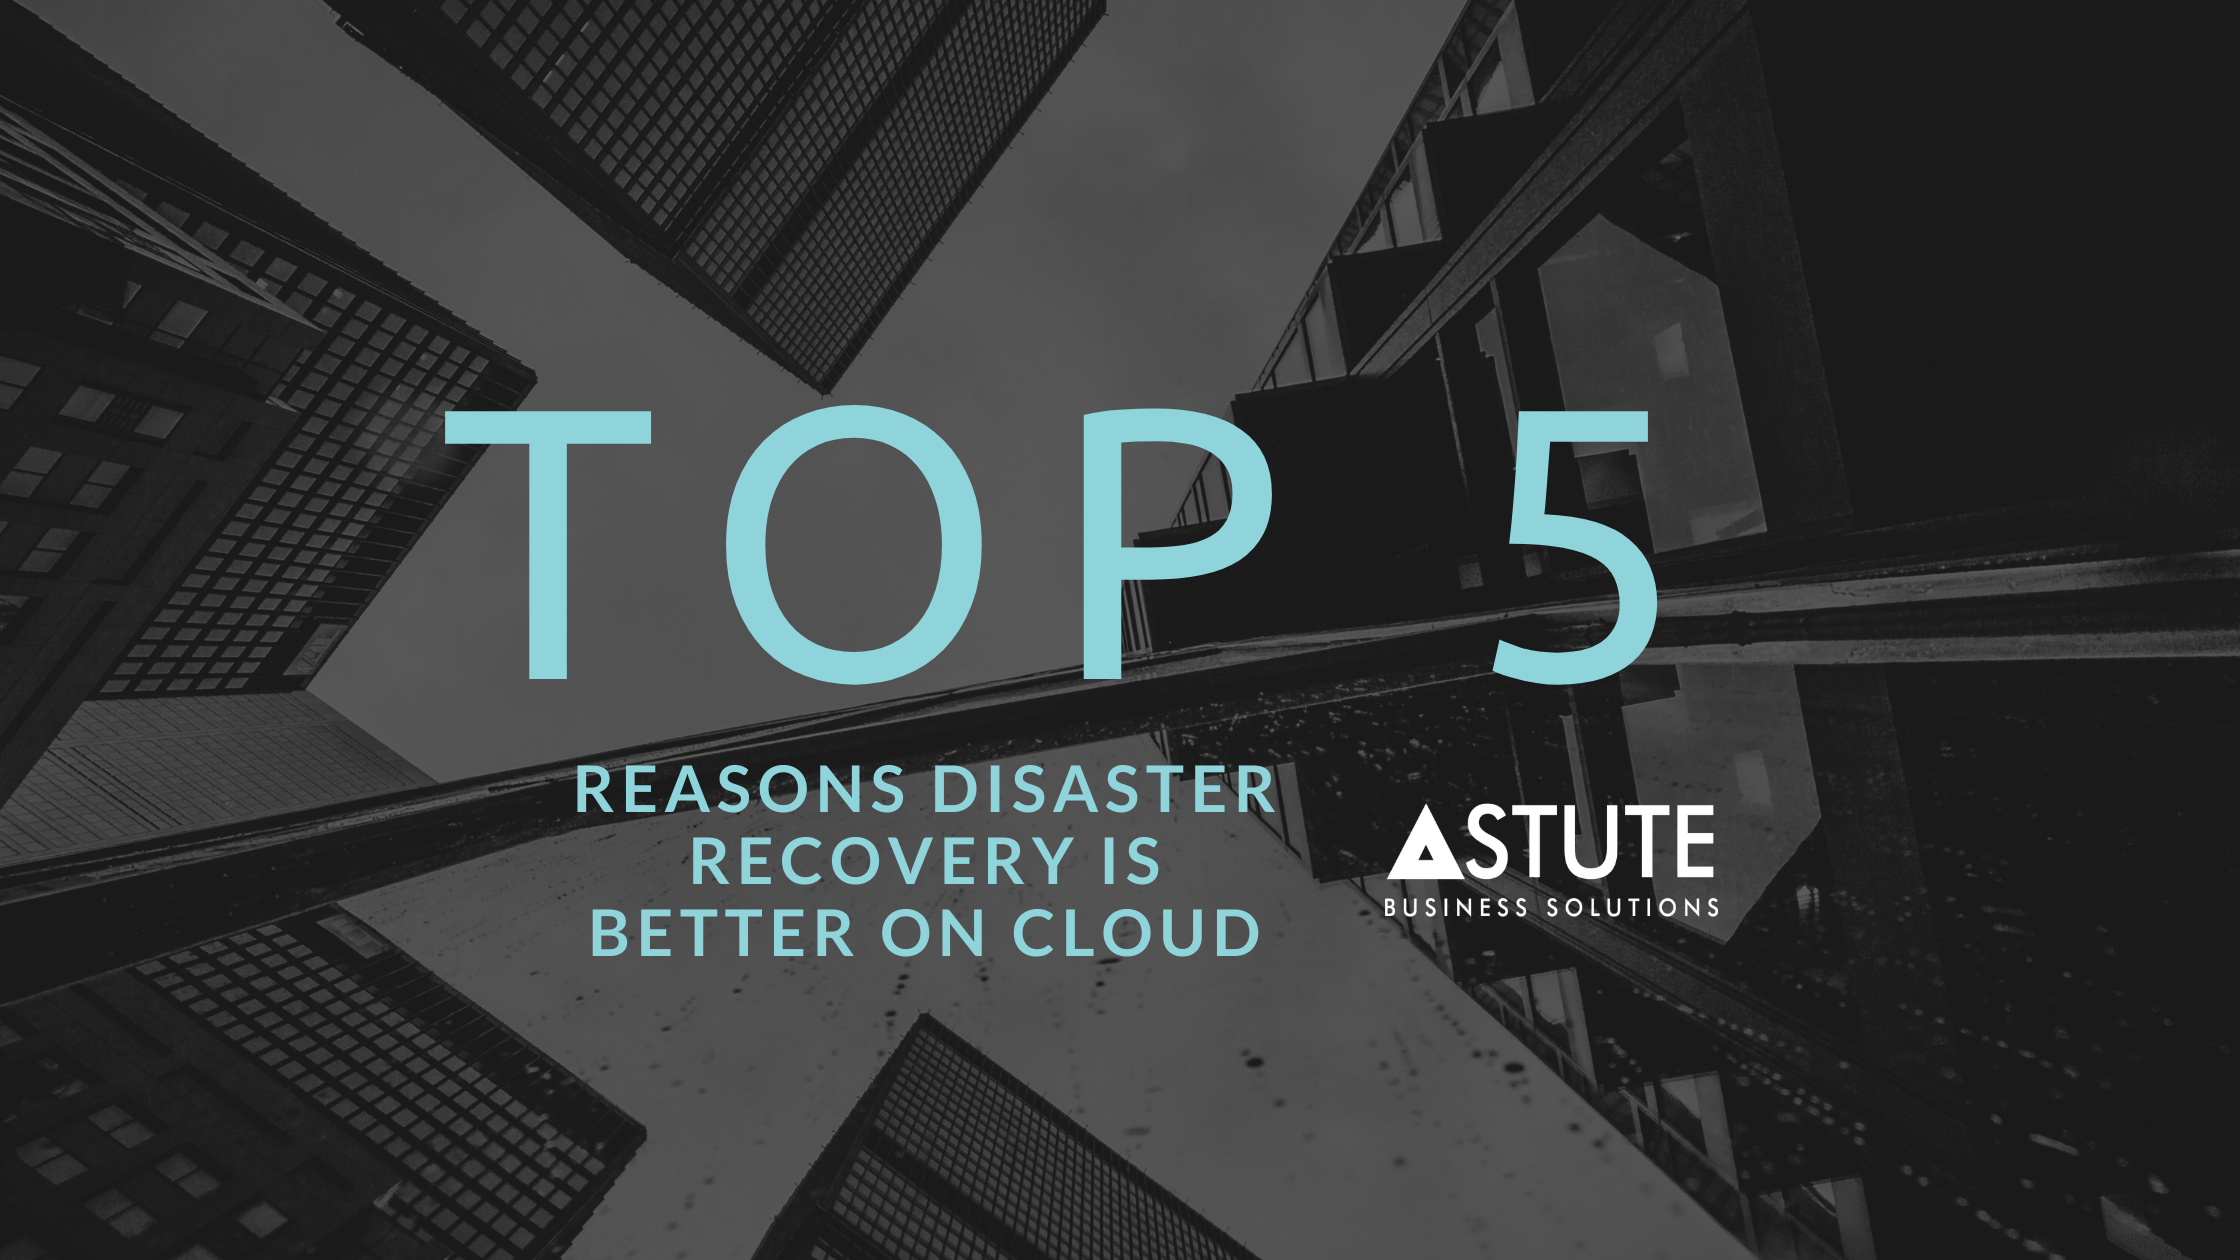 Top 5 Reasons Disaster Recovery is Better on Cloud